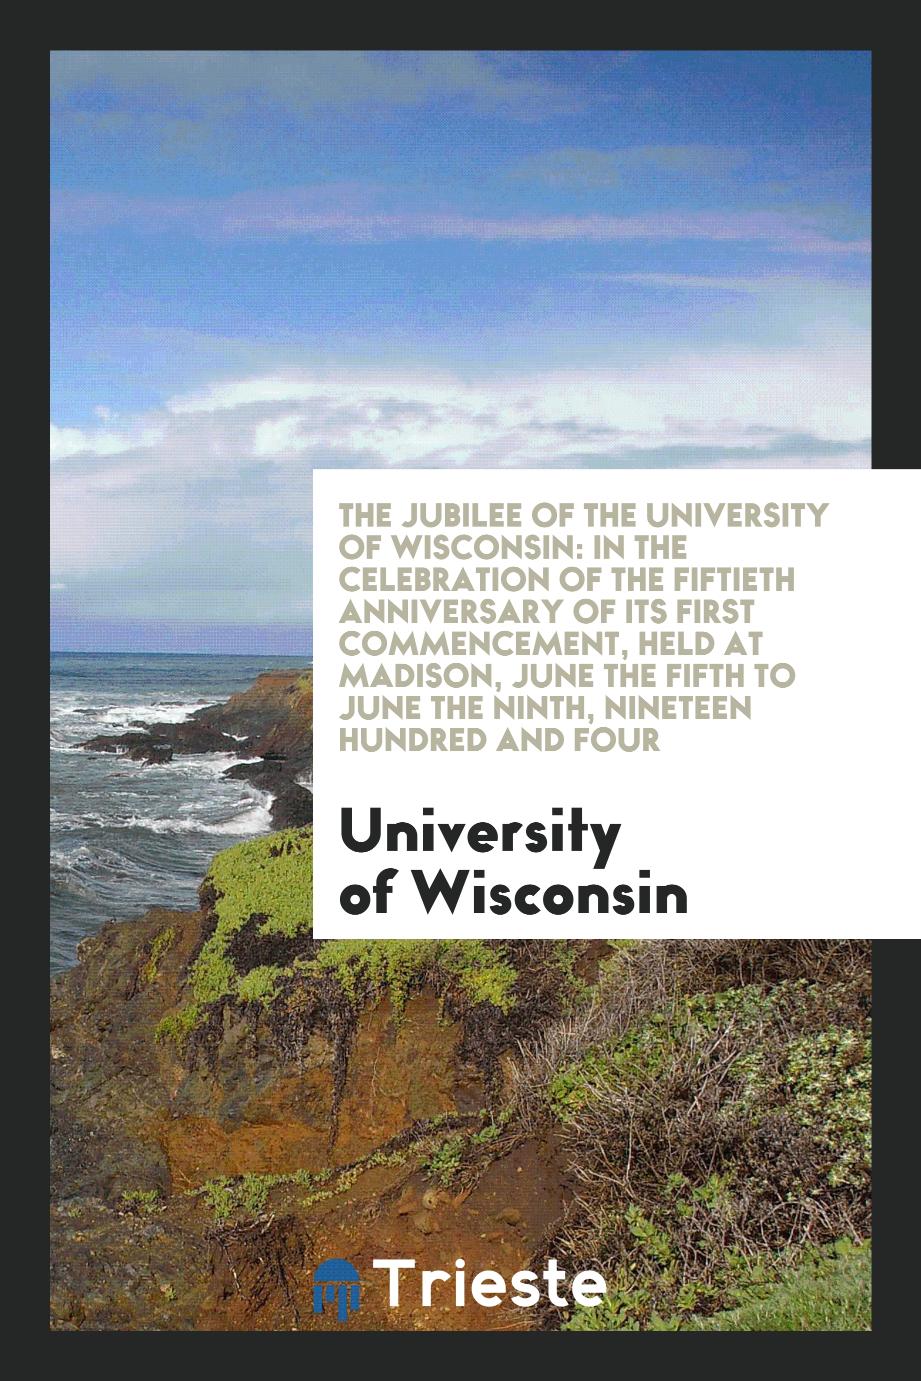 The jubilee of the University of Wisconsin: in the celebration of the fiftieth anniversary of its first commencement, held at Madison, June the fifth to June the ninth, nineteen hundred and four